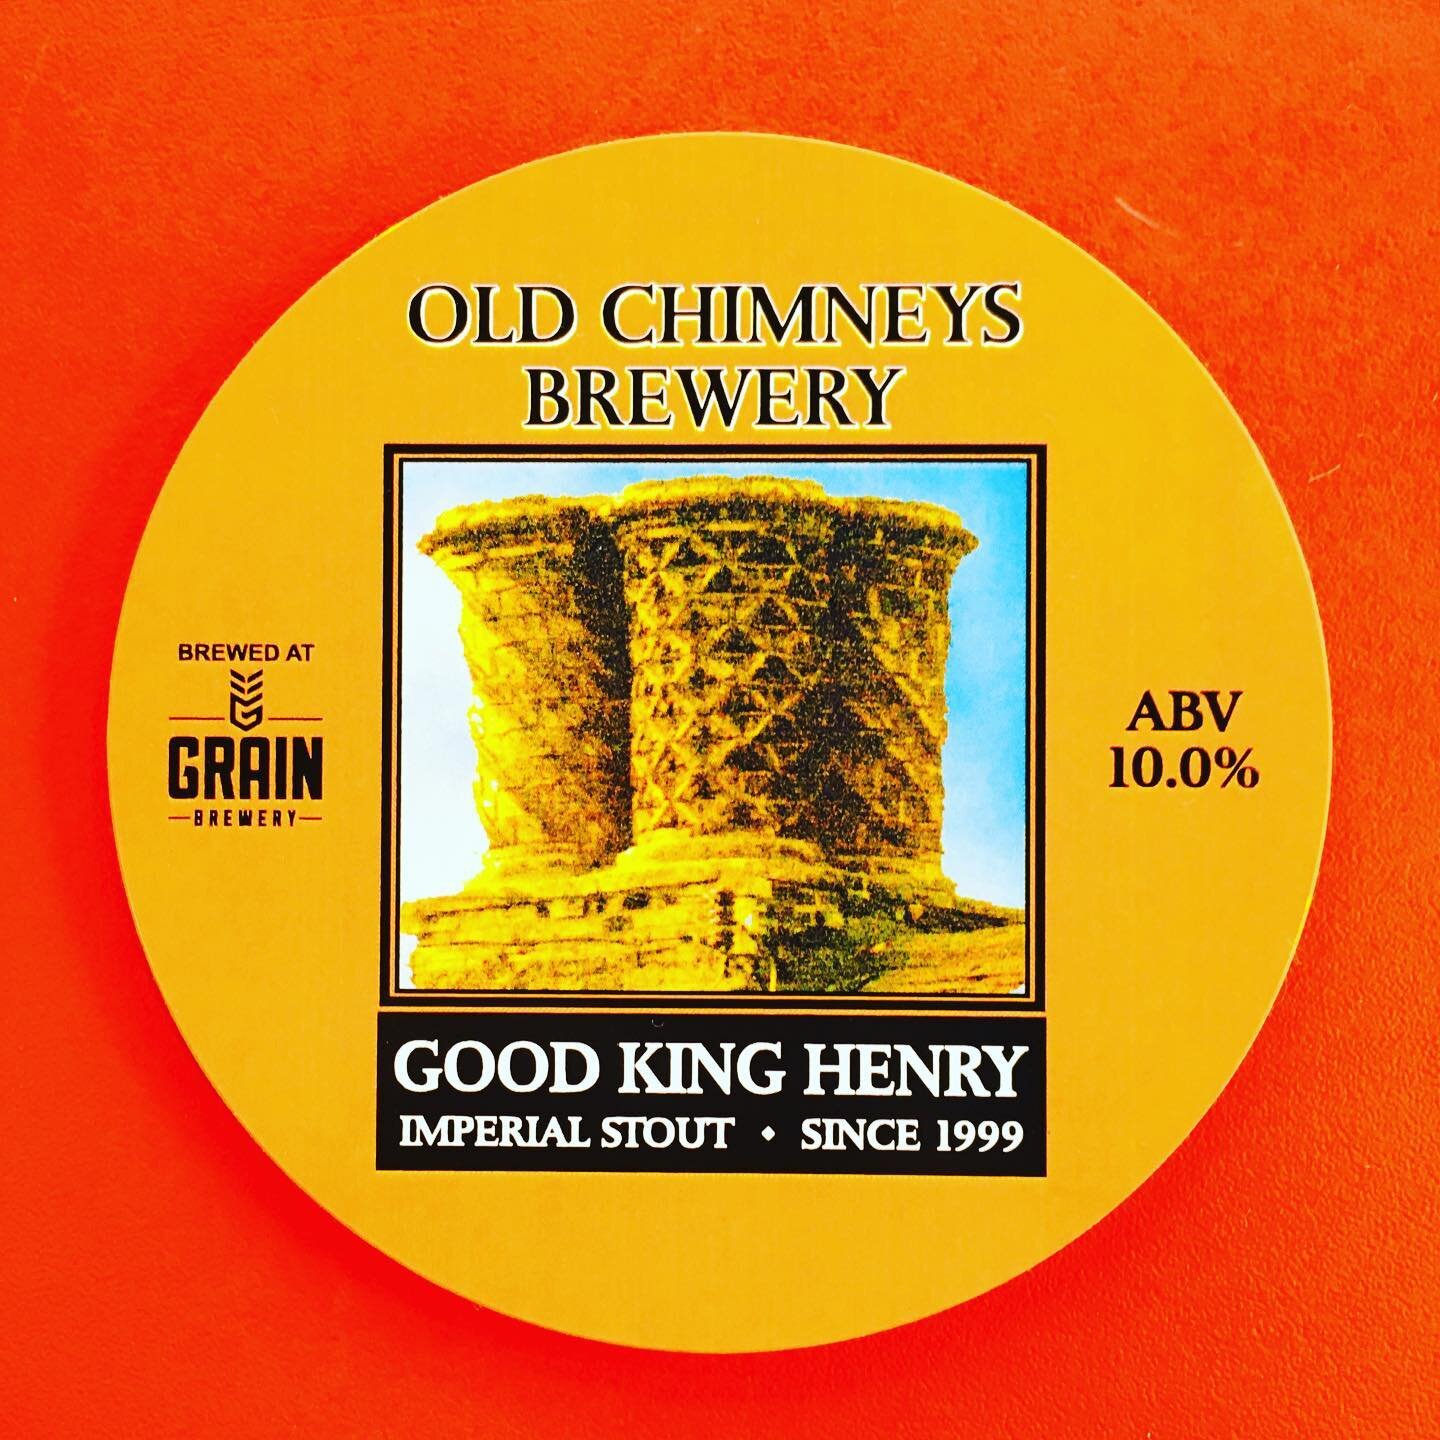 Good King Henry by #oldchimneysbrewery coming on keg soon...

As soon as @torrsidebrewing  Valour 1917 Imperial Stout goes, it&rsquo;s going on.

#kraftwerksnotts #oldchimneysbrewery #goodkinghenry #imperialstout #craftbeer #nottingham #drinklocal #p